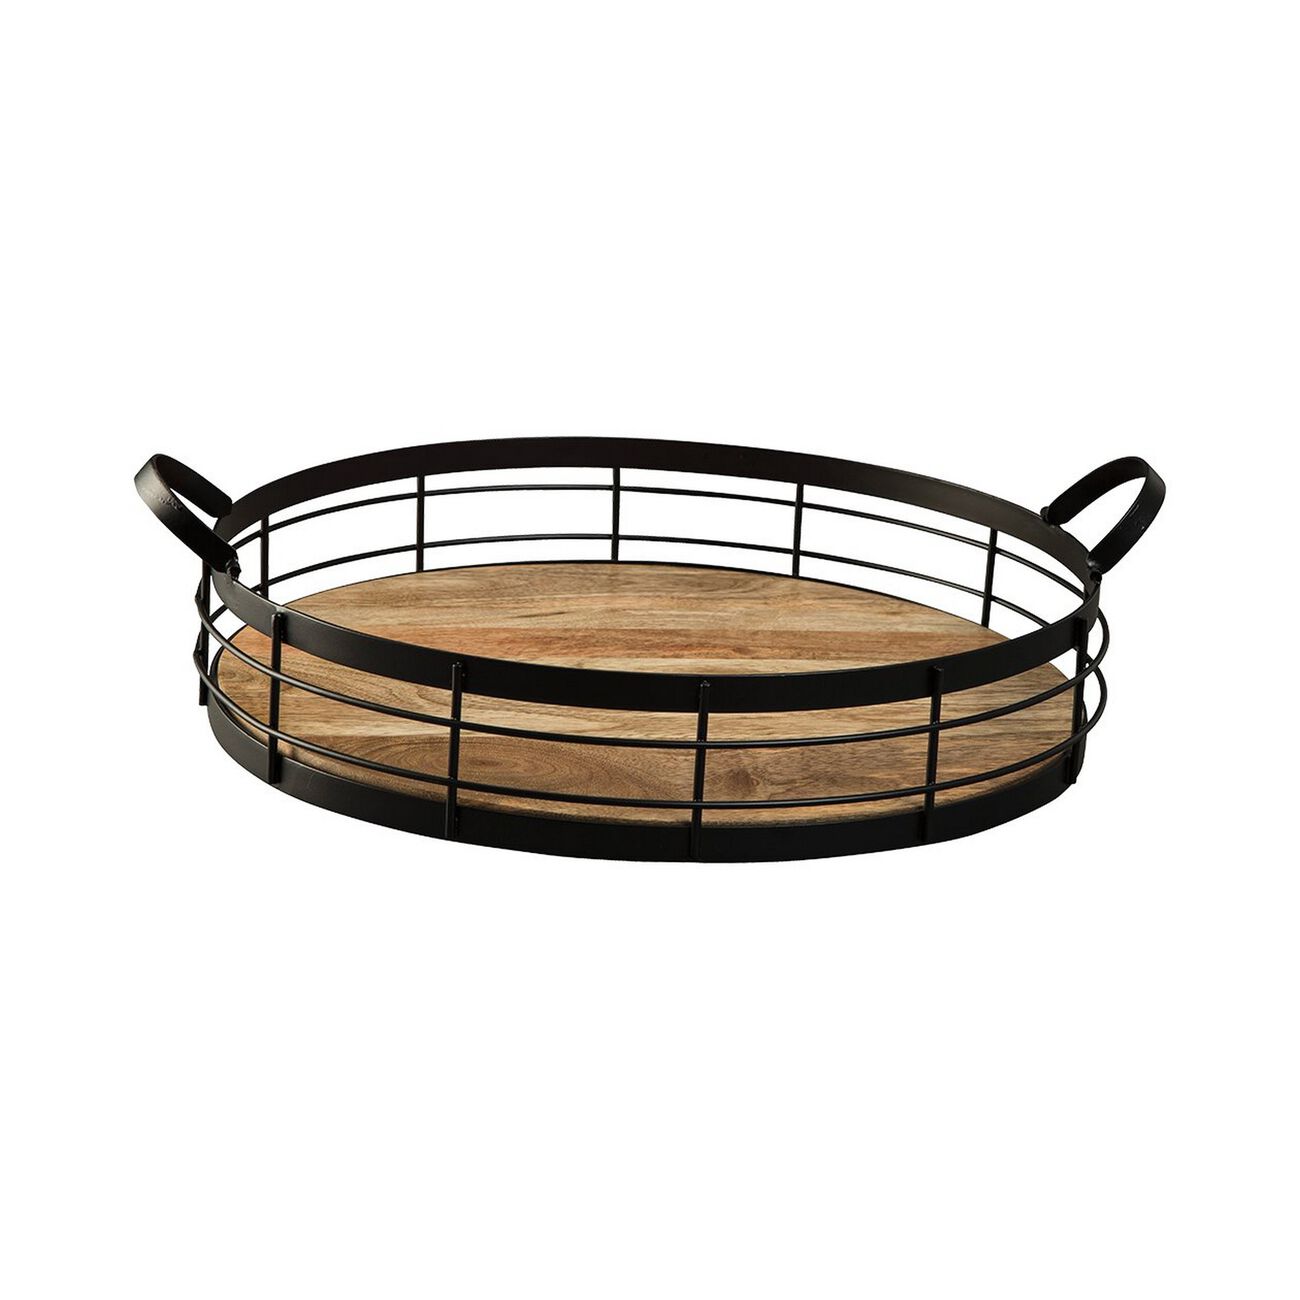 Raised Grid Design Wood and Metal Frame Round Tray, Black and Brown